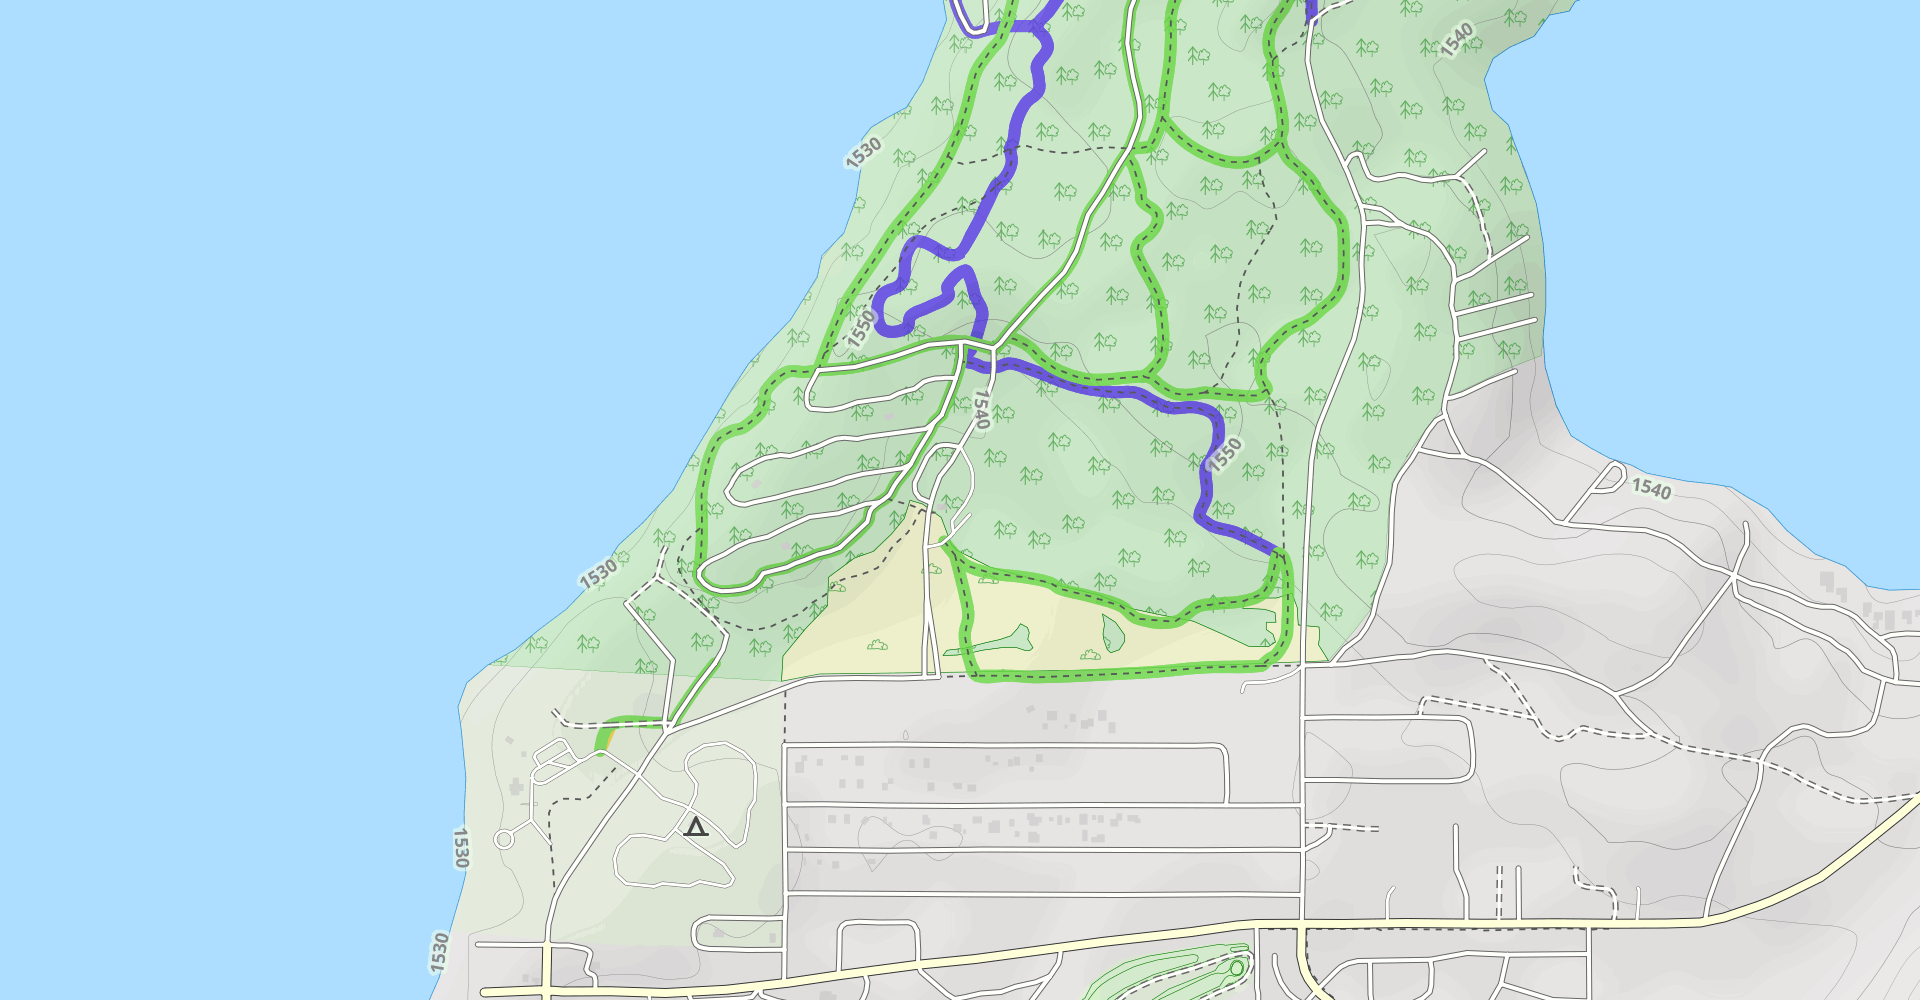 Miles Standish, Huckleberry, and Peninsula Trail Loop